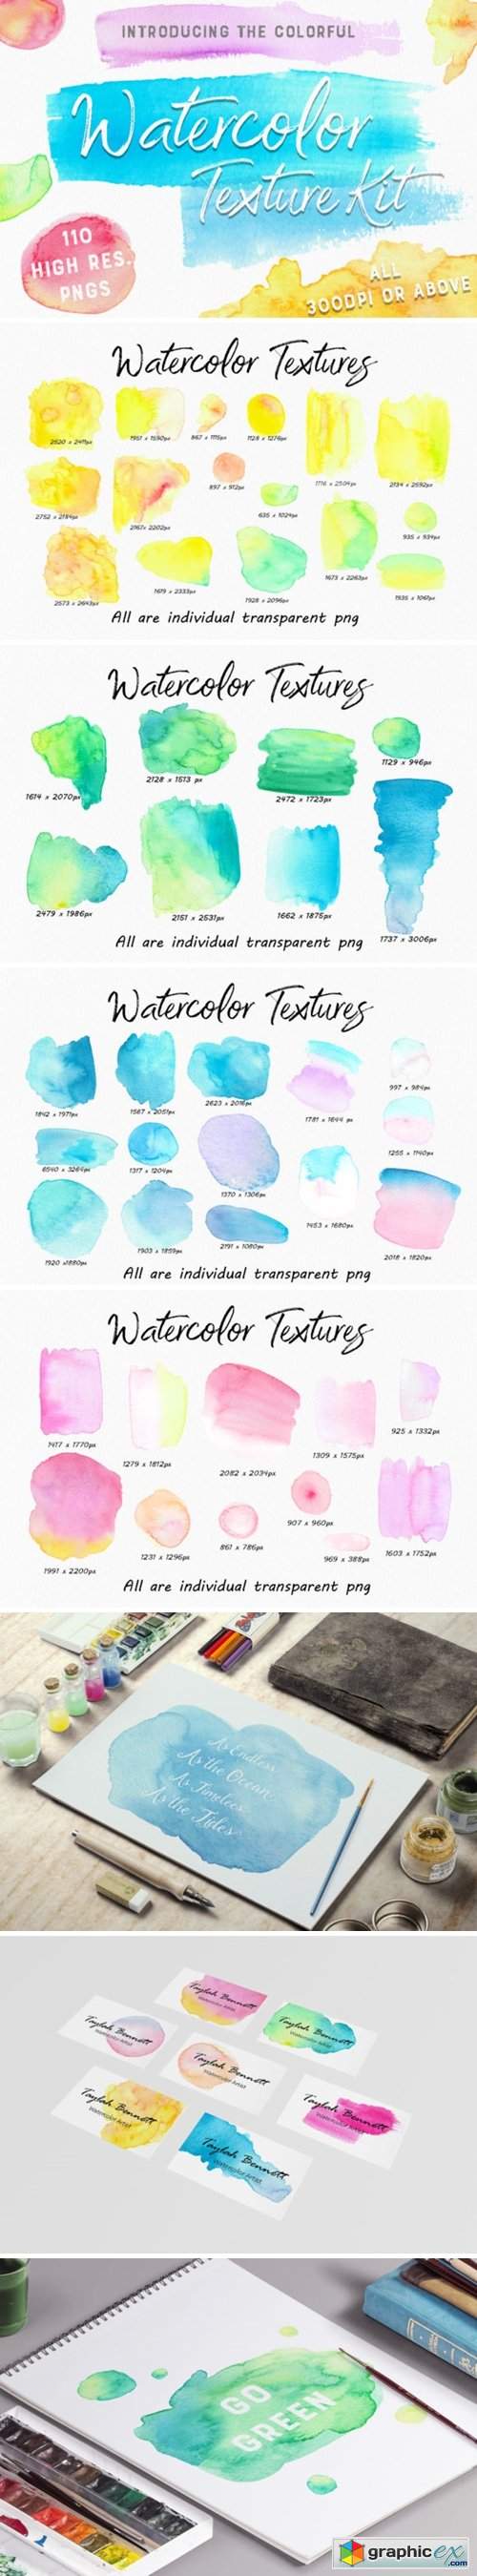 The Colourful Watercolour Kit